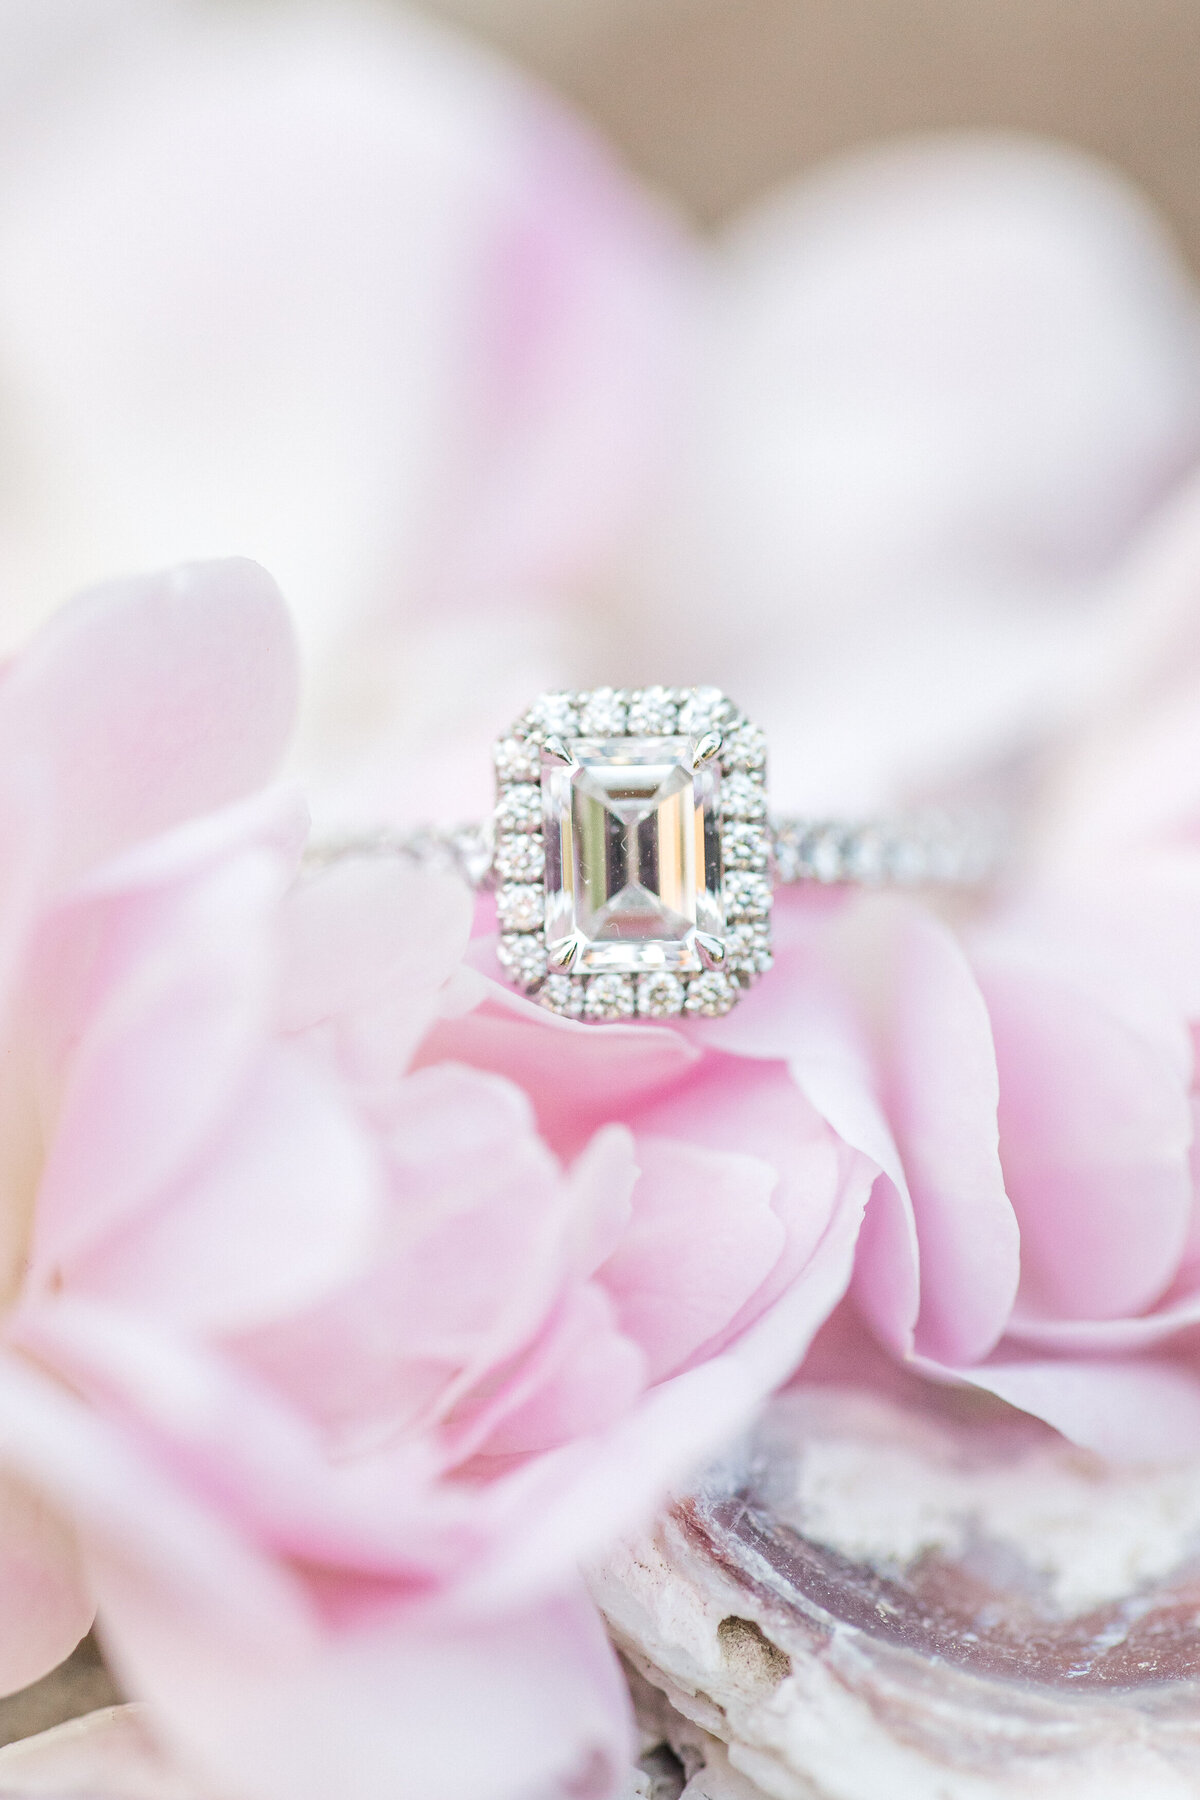 Close-up wedding ring on flowers by Karen Schanely